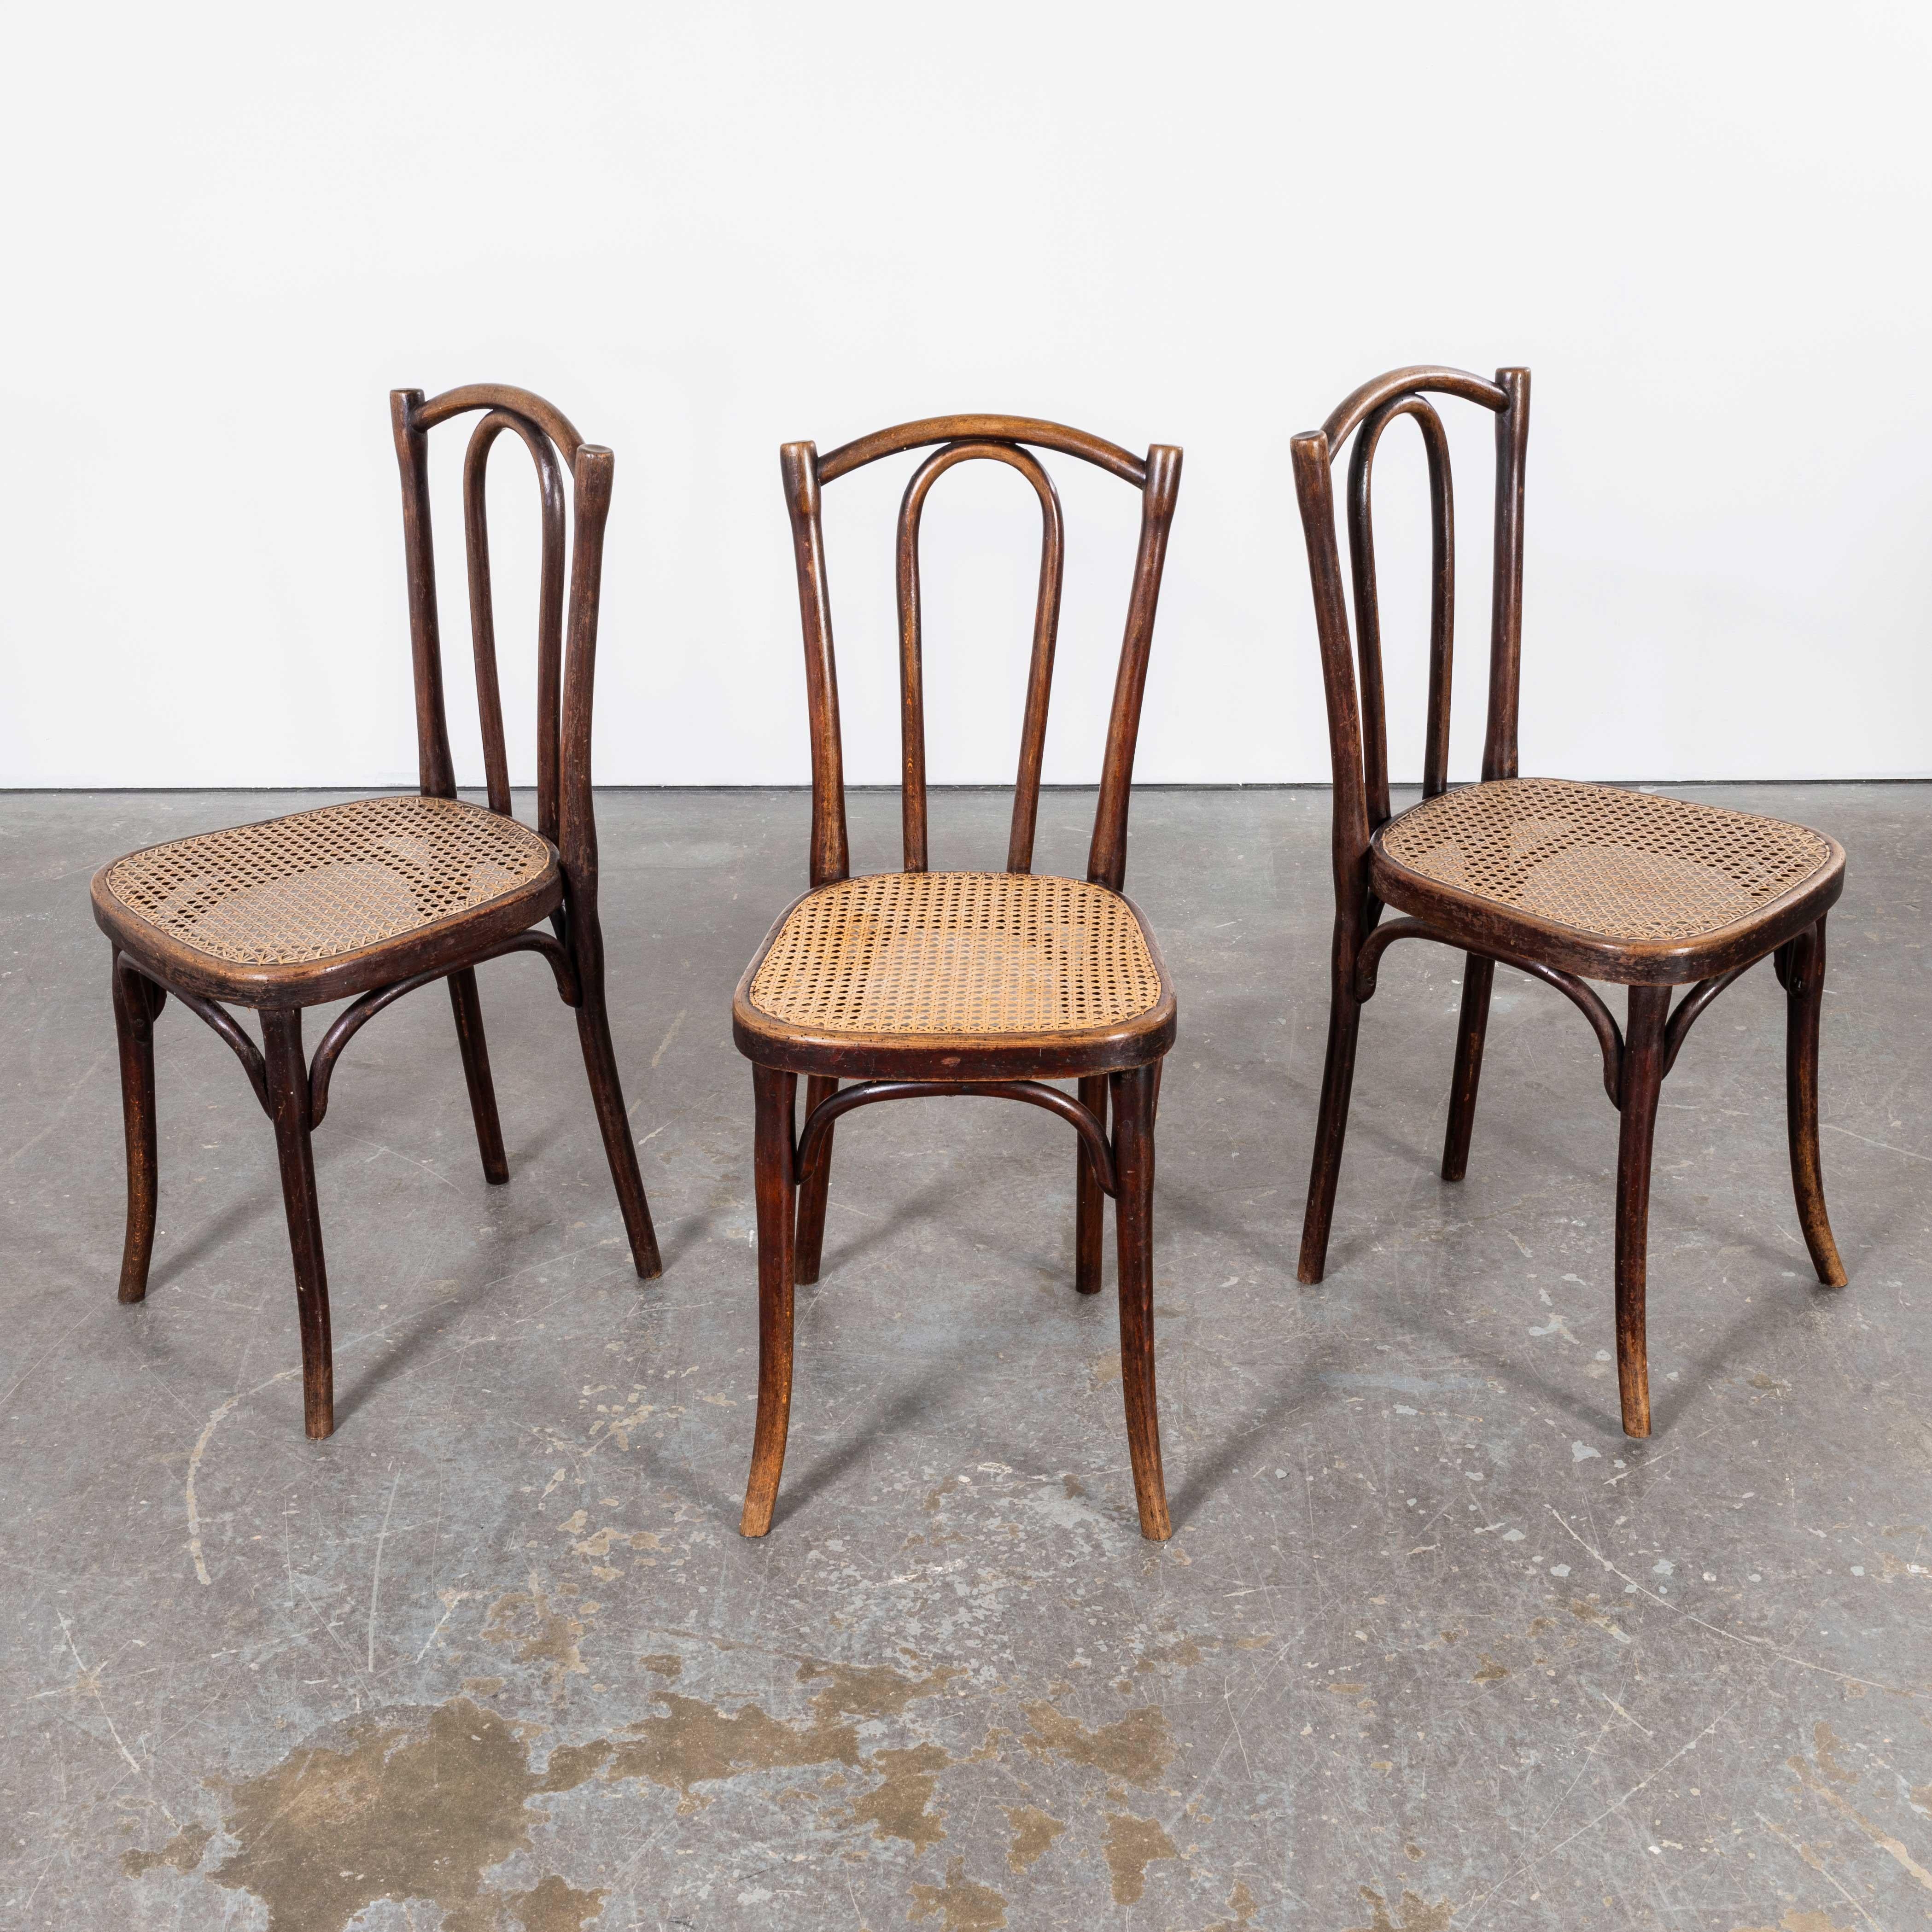 French 1920’s Thonet Original Cane Seated Dining Chairs – Set of Three For Sale